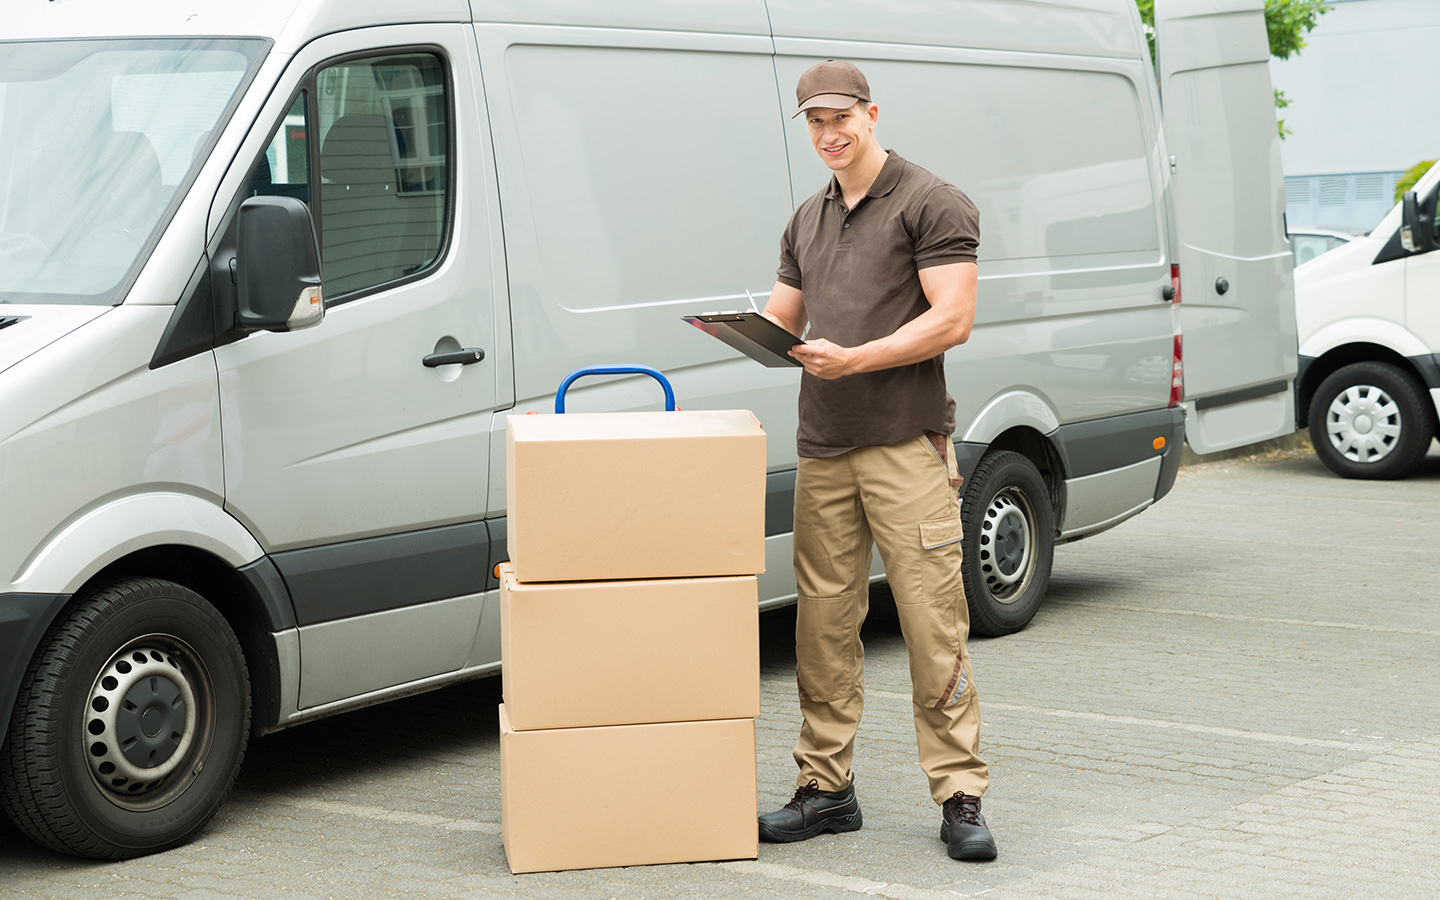 south west london removal companies